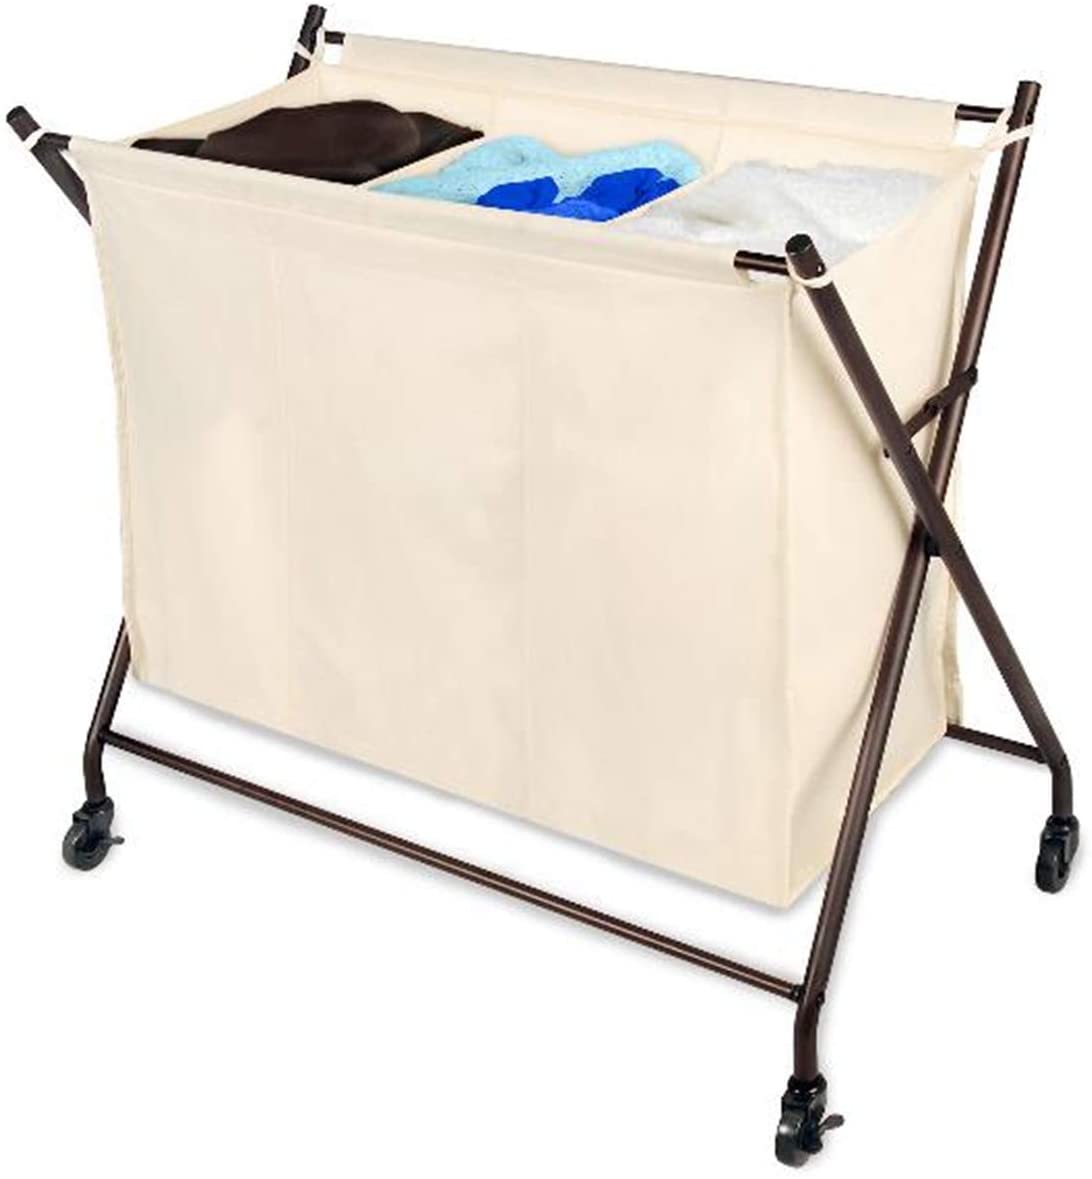 Premium 3-Compartment Rolling Canvas Laundry Sorter Hamper with Wheels and Handles - Hold 9 Loads - Smart Design® 1